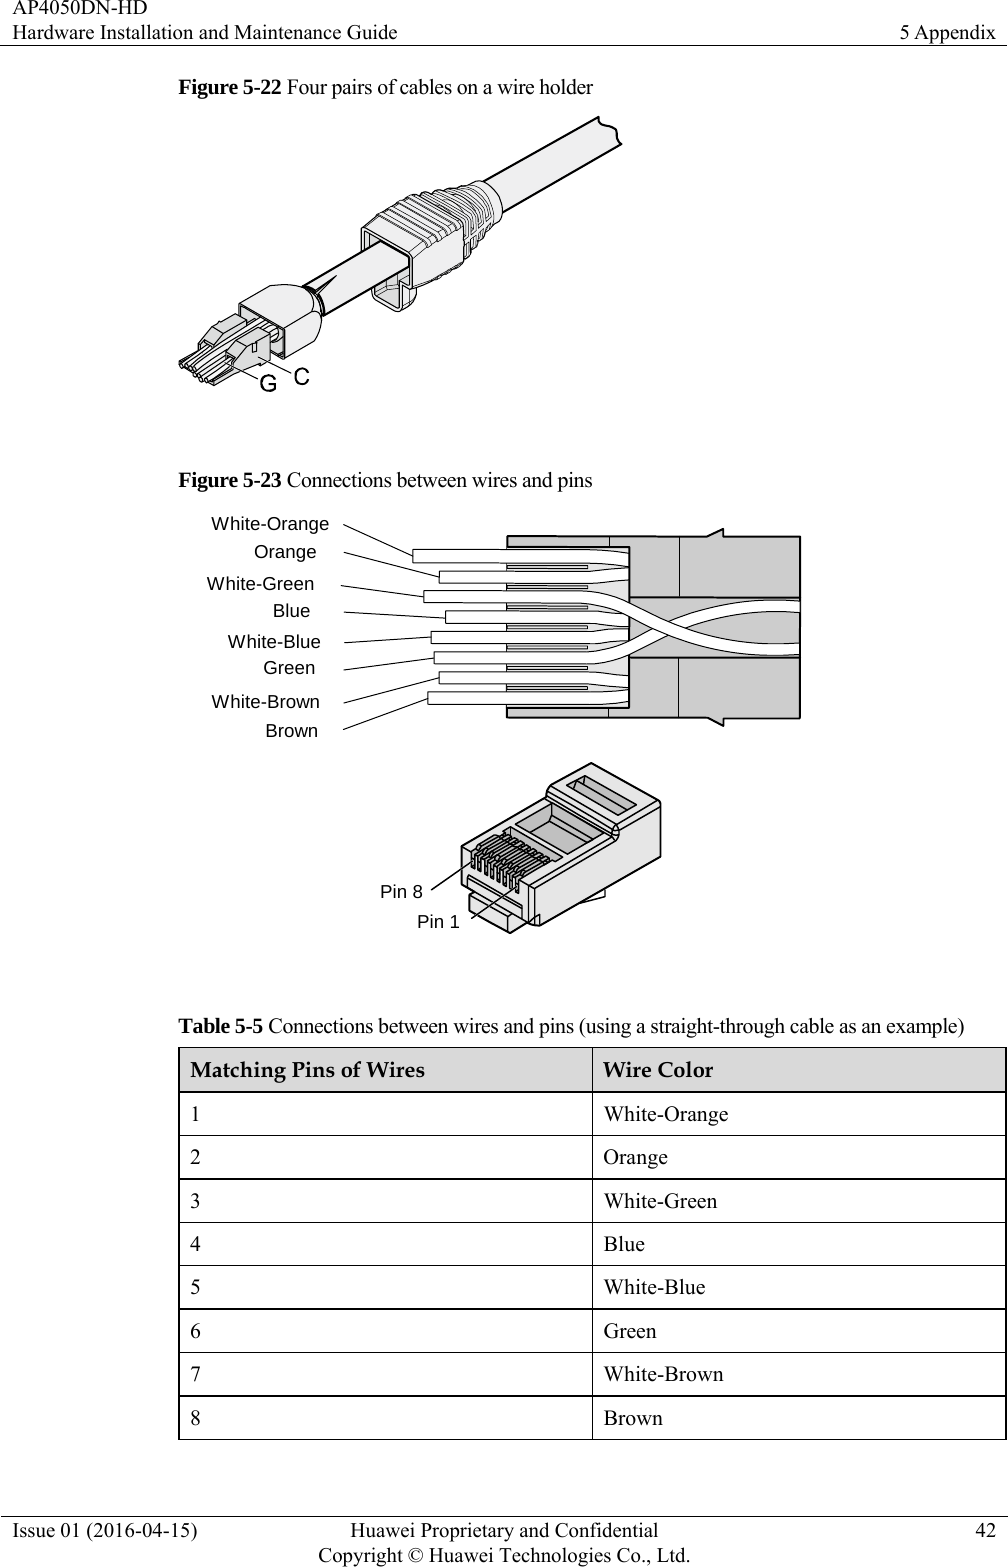 AP4050DN-HD Hardware Installation and Maintenance Guide  5 Appendix Issue 01 (2016-04-15)  Huawei Proprietary and Confidential         Copyright © Huawei Technologies Co., Ltd.42 Figure 5-22 Four pairs of cables on a wire holder   Figure 5-23 Connections between wires and pins BrownWhite-BrownGreenWhite-BlueBlueWhite-GreenOrangeWhite-OrangePin 8Pin 1   Table 5-5 Connections between wires and pins (using a straight-through cable as an example) Matching Pins of Wires  Wire Color 1 White-Orange 2 Orange 3 White-Green 4 Blue 5 White-Blue 6 Green 7 White-Brown 8 Brown 